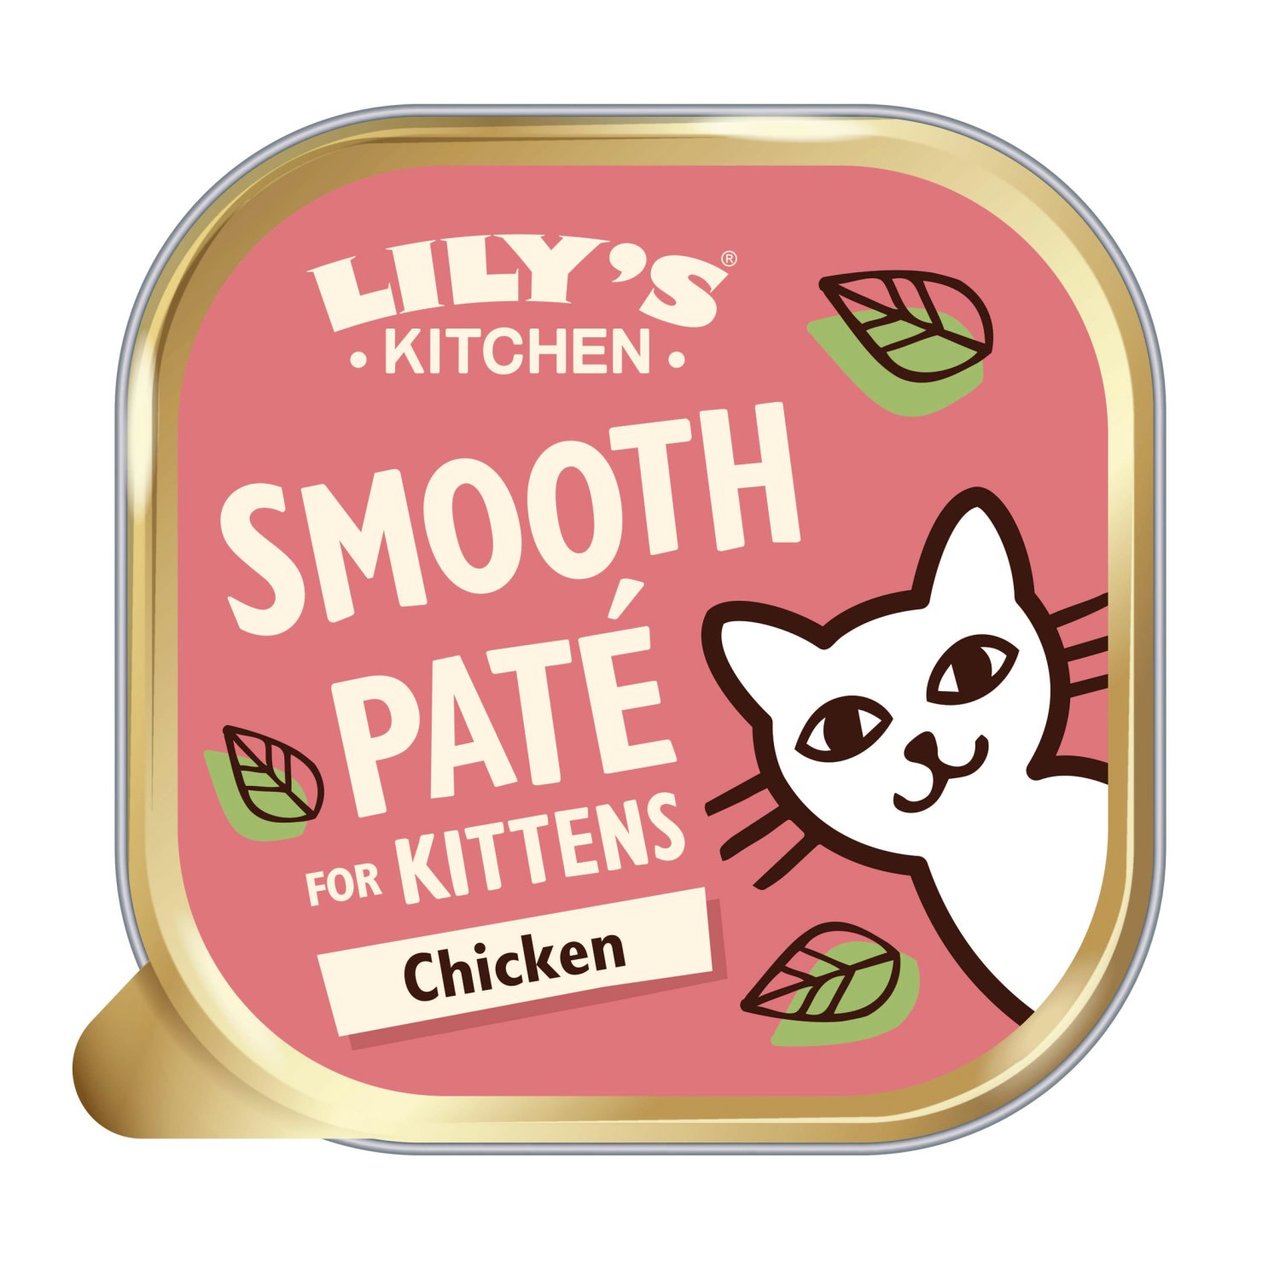 An image of Lily's Kitchen Grain Free Chicken Dinner for Kittens